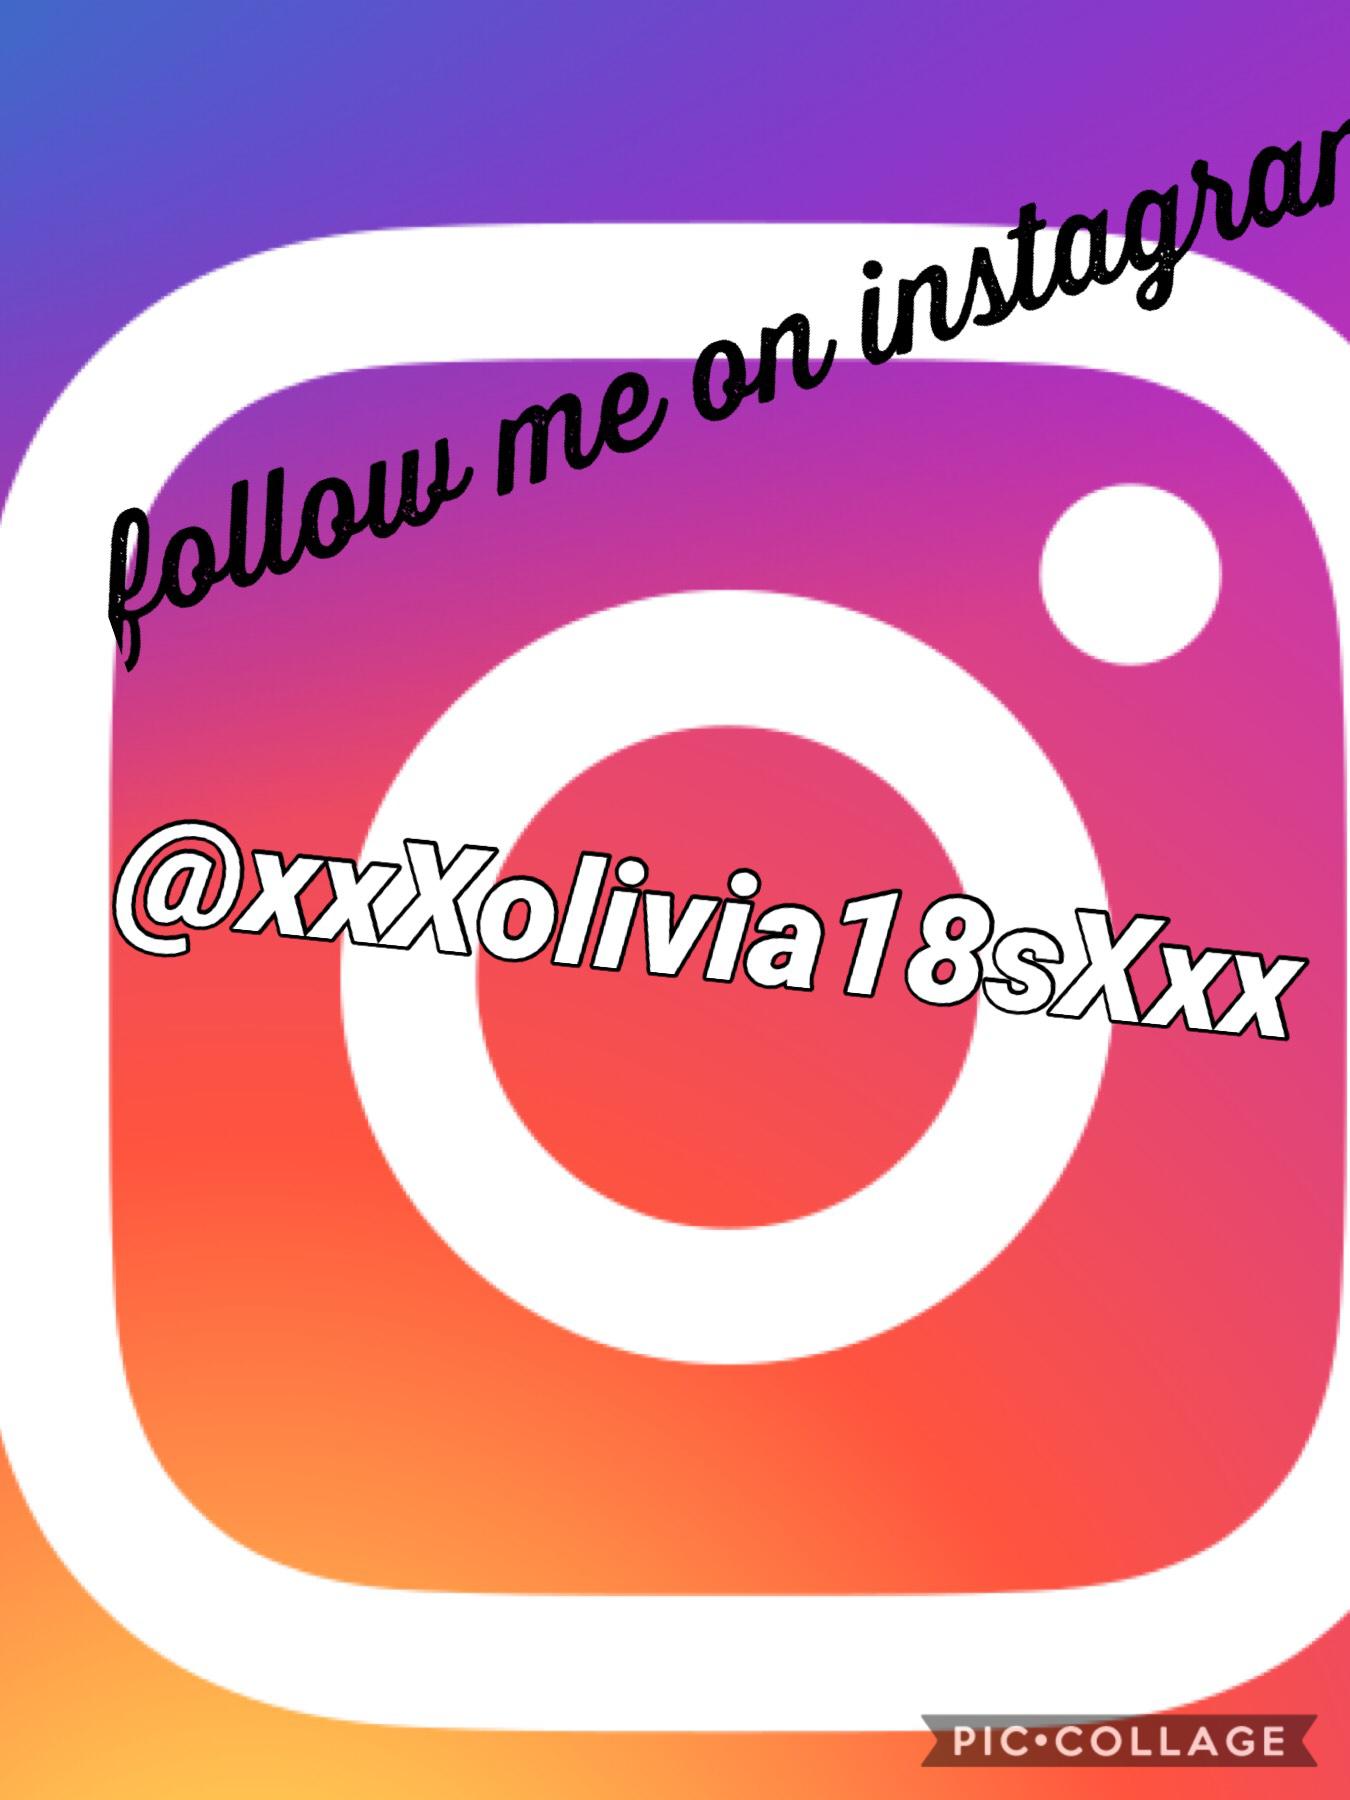 follow me plz, trying to get to 100 followers